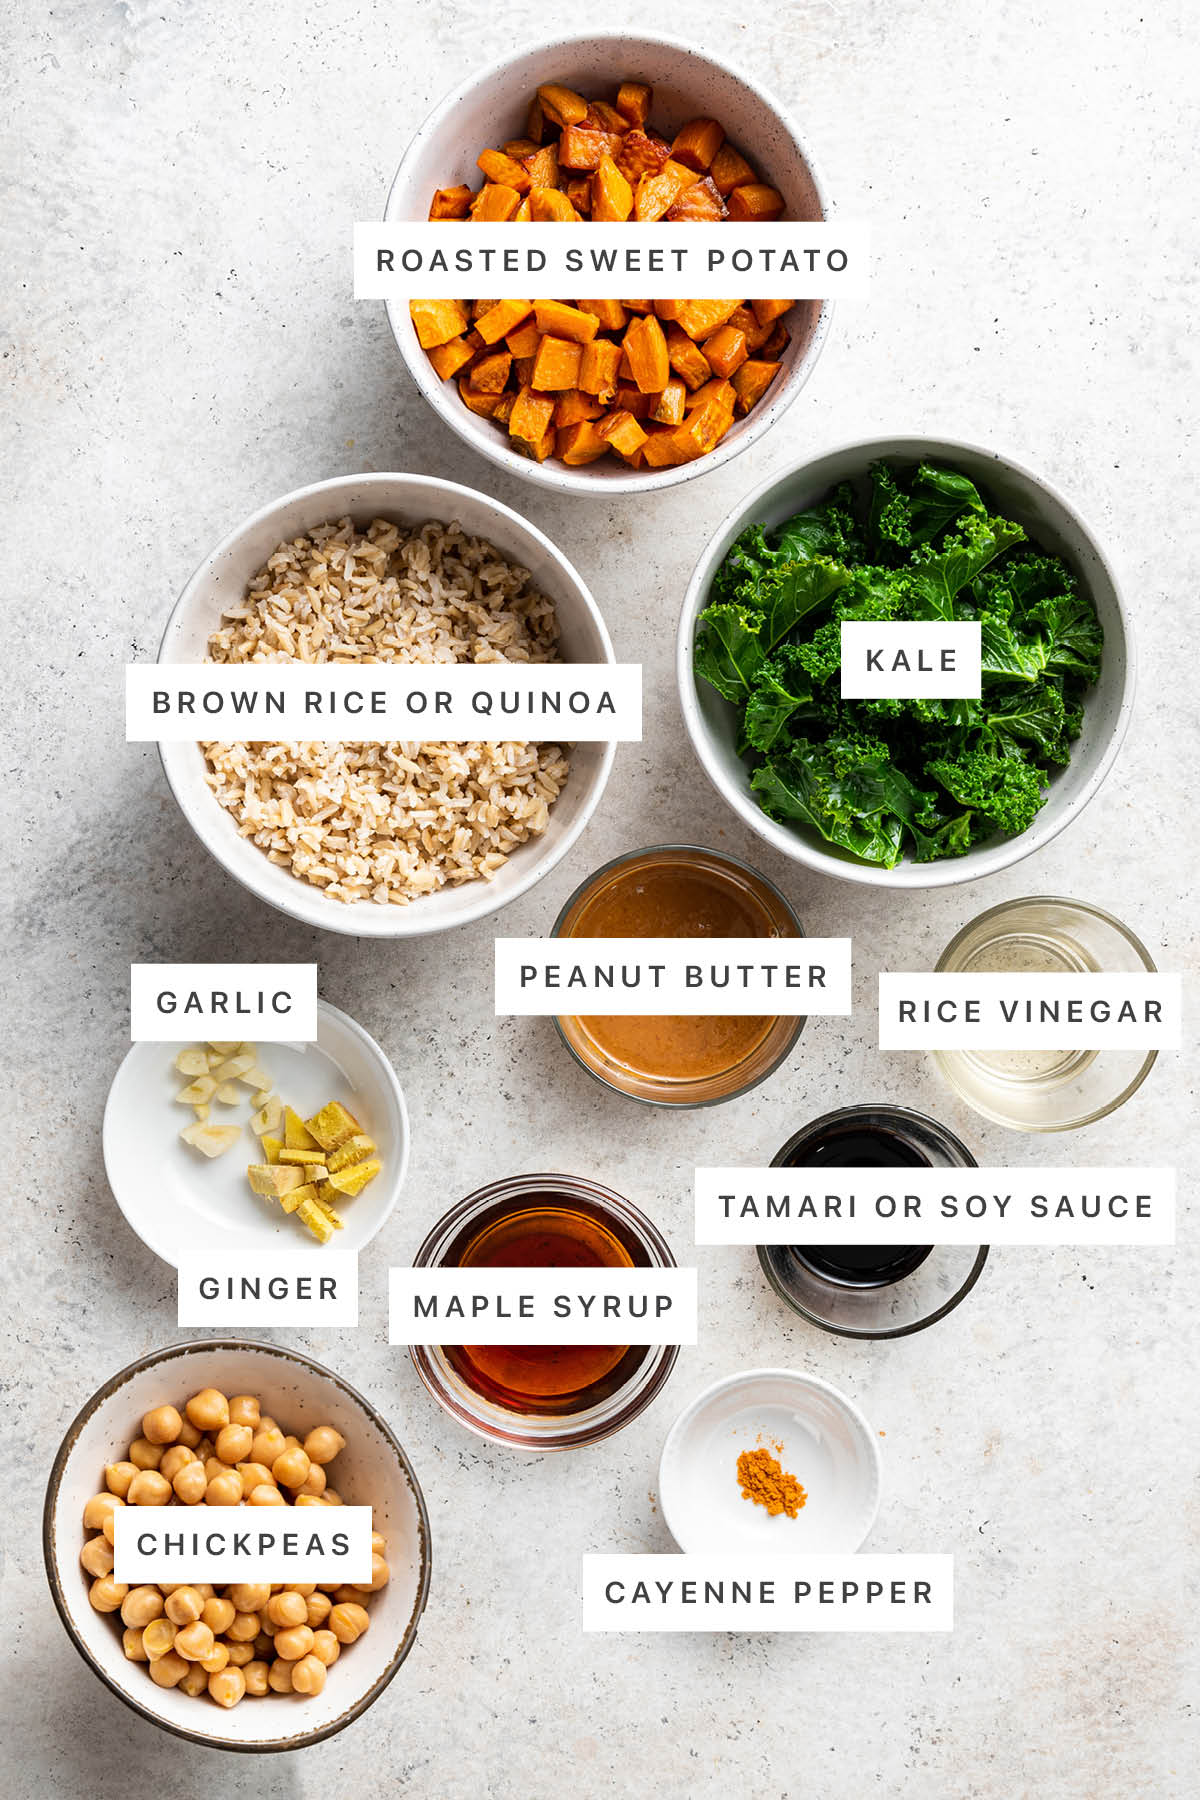 Ingredients measured out to make Kale and Sweet Potato Brown Rice Bowls: roasted sweet potato, brown rice, kale, garlic, ginger, peanut butter, rice vinegar, maple syrup, tamari, chickpeas and cayenne pepper.